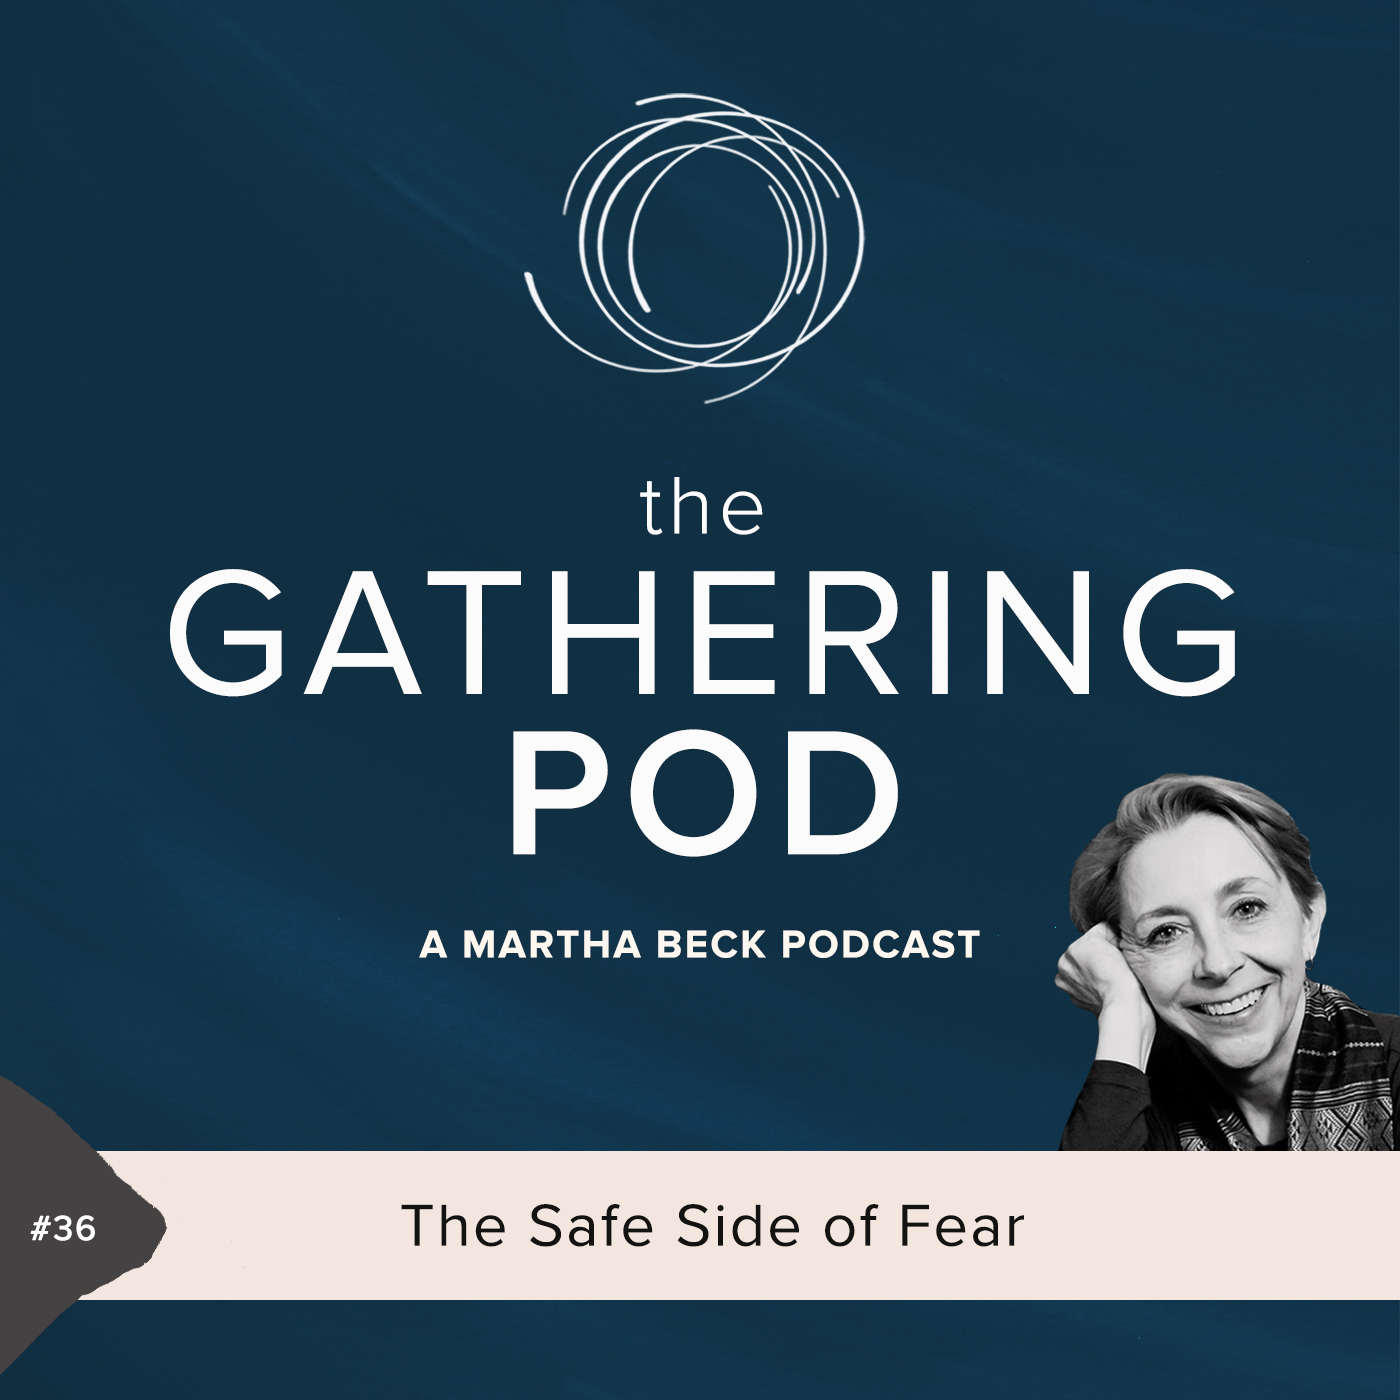 Image for The Gathering Pod A Martha Beck Podcast Episode #36 The Safe Side of Fear